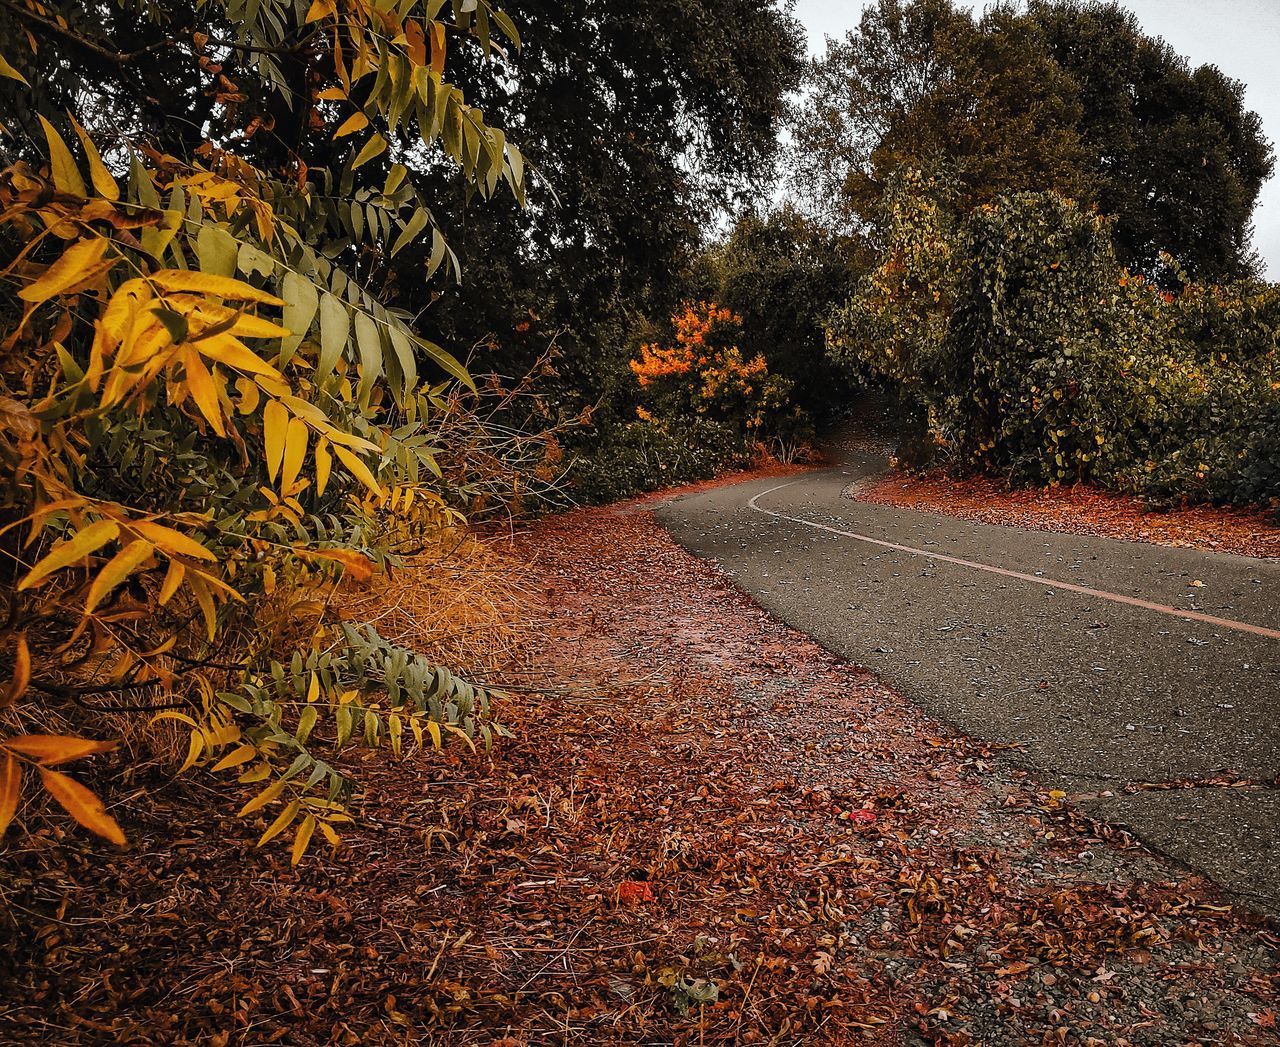 ROAD AMIDST TREES IN AUTUMN